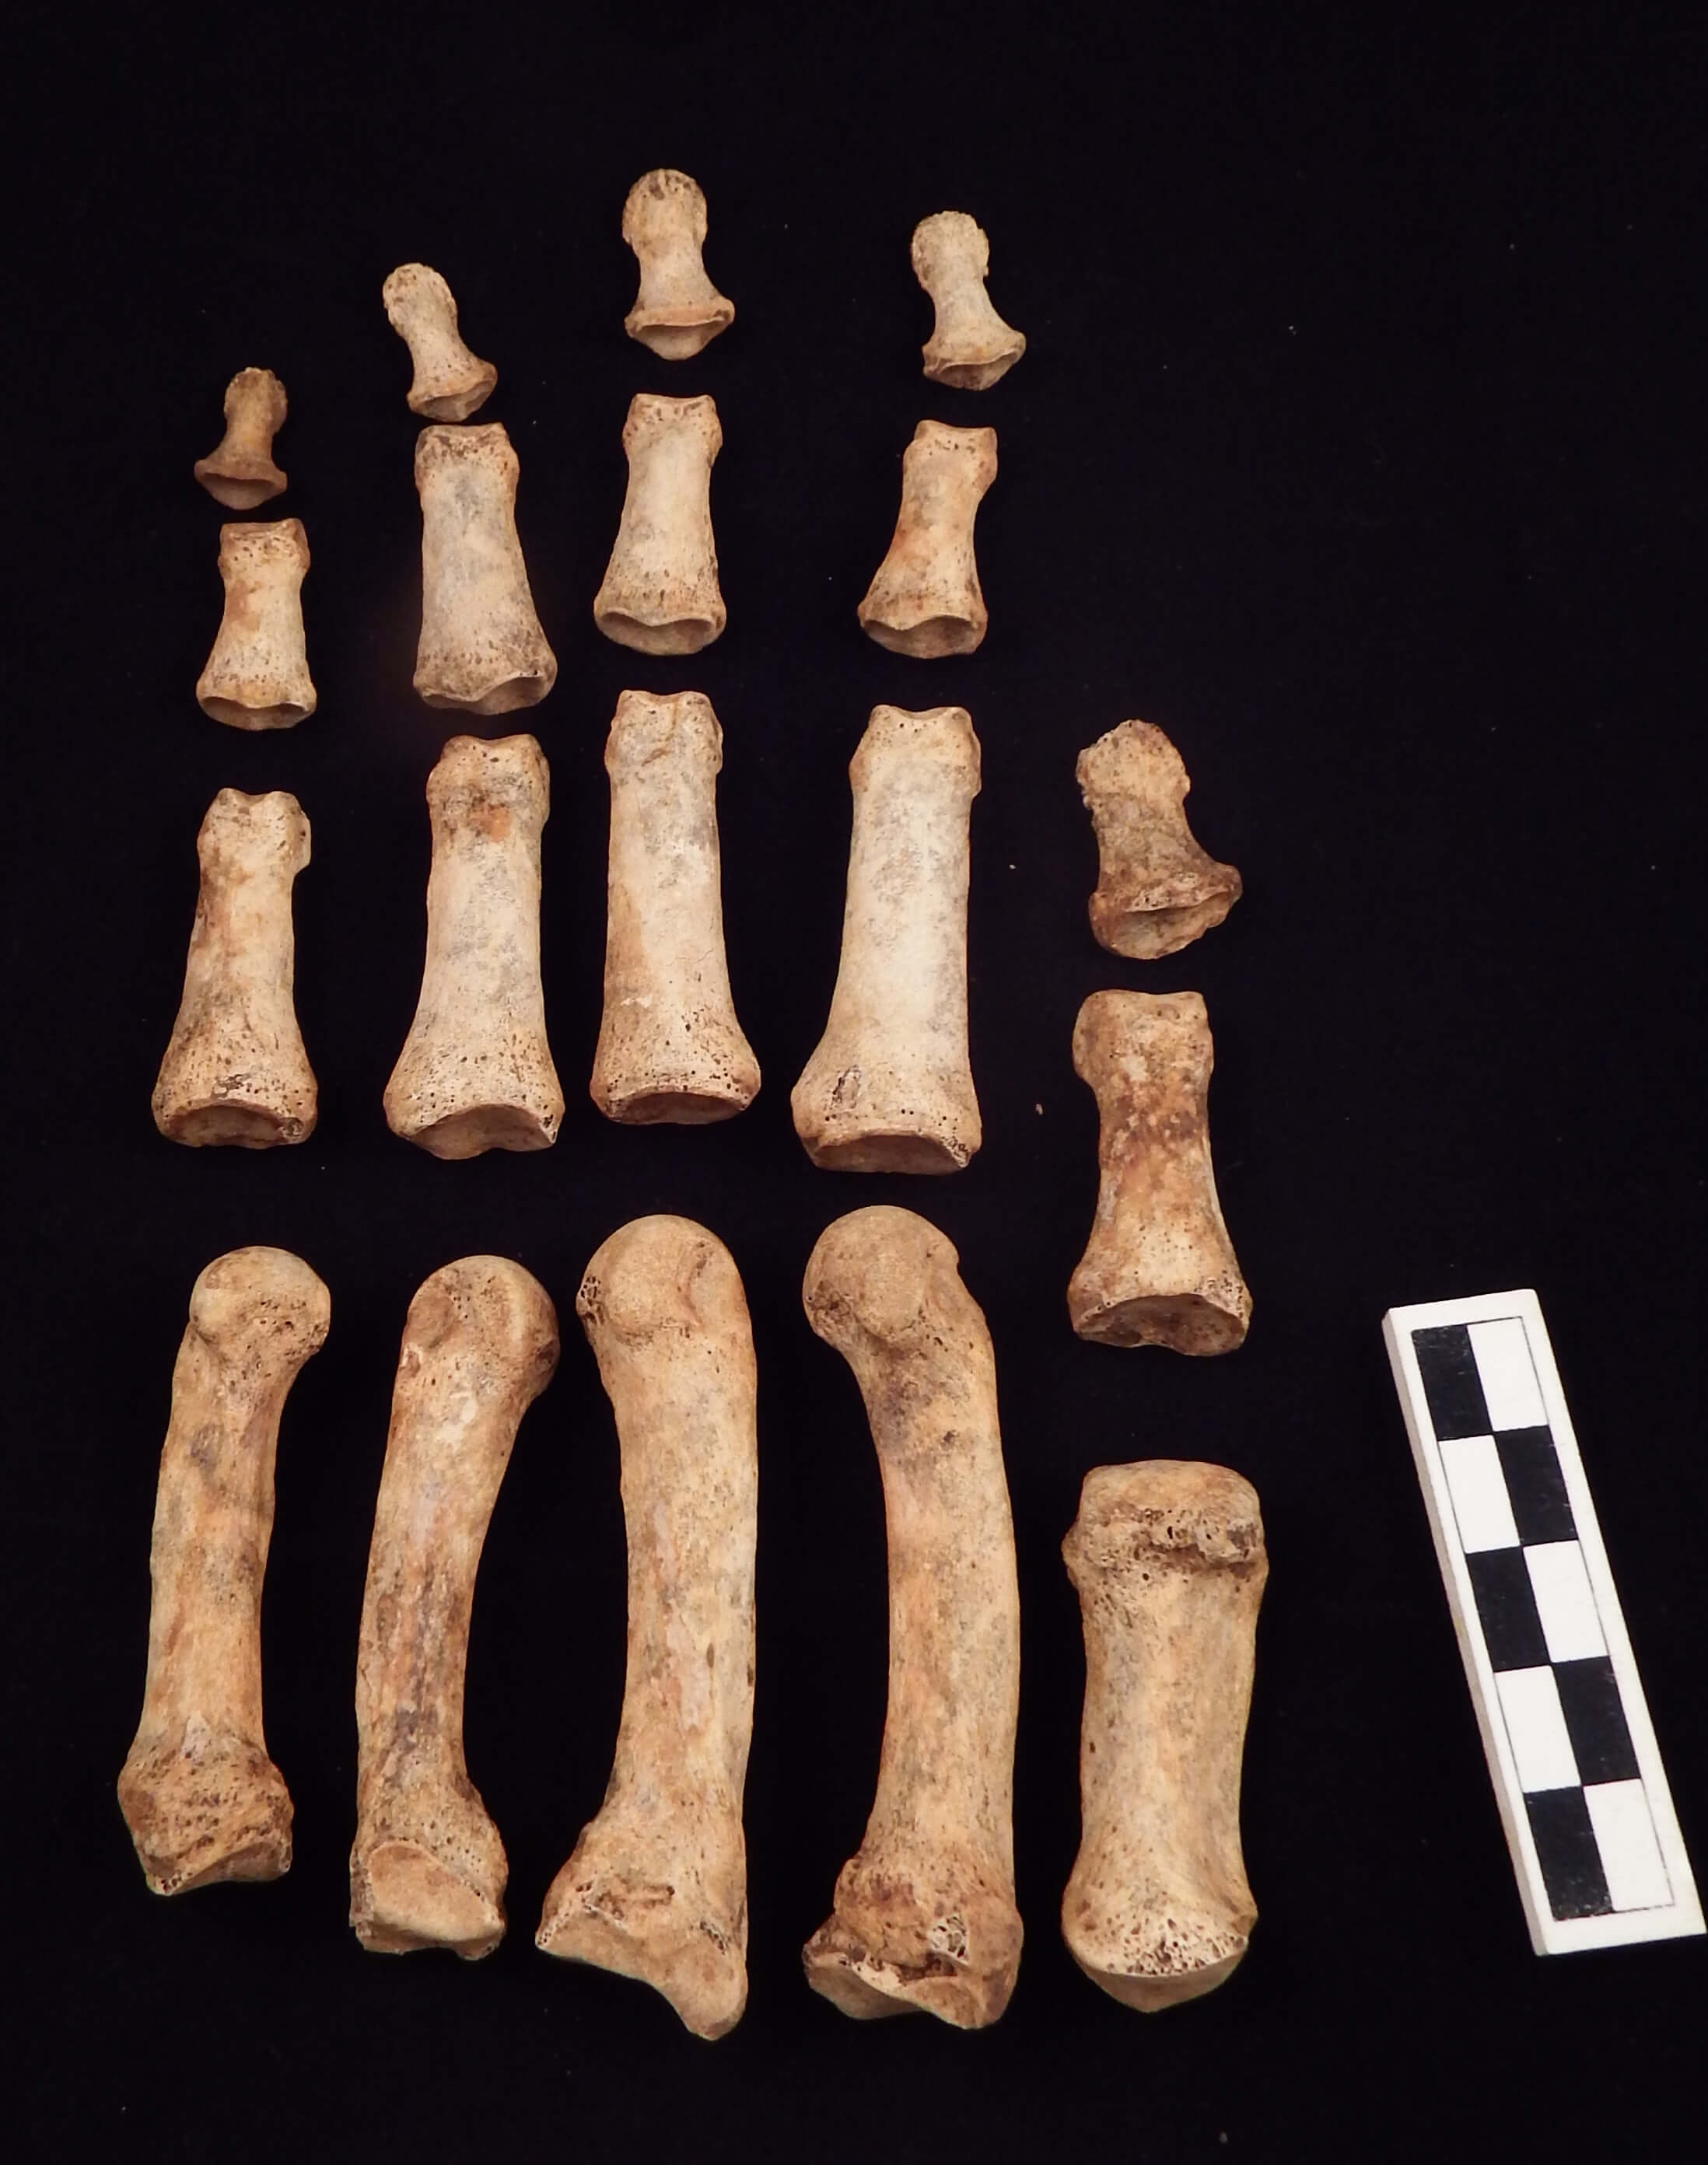 Finger bones associated with the Sugar Land 95 project